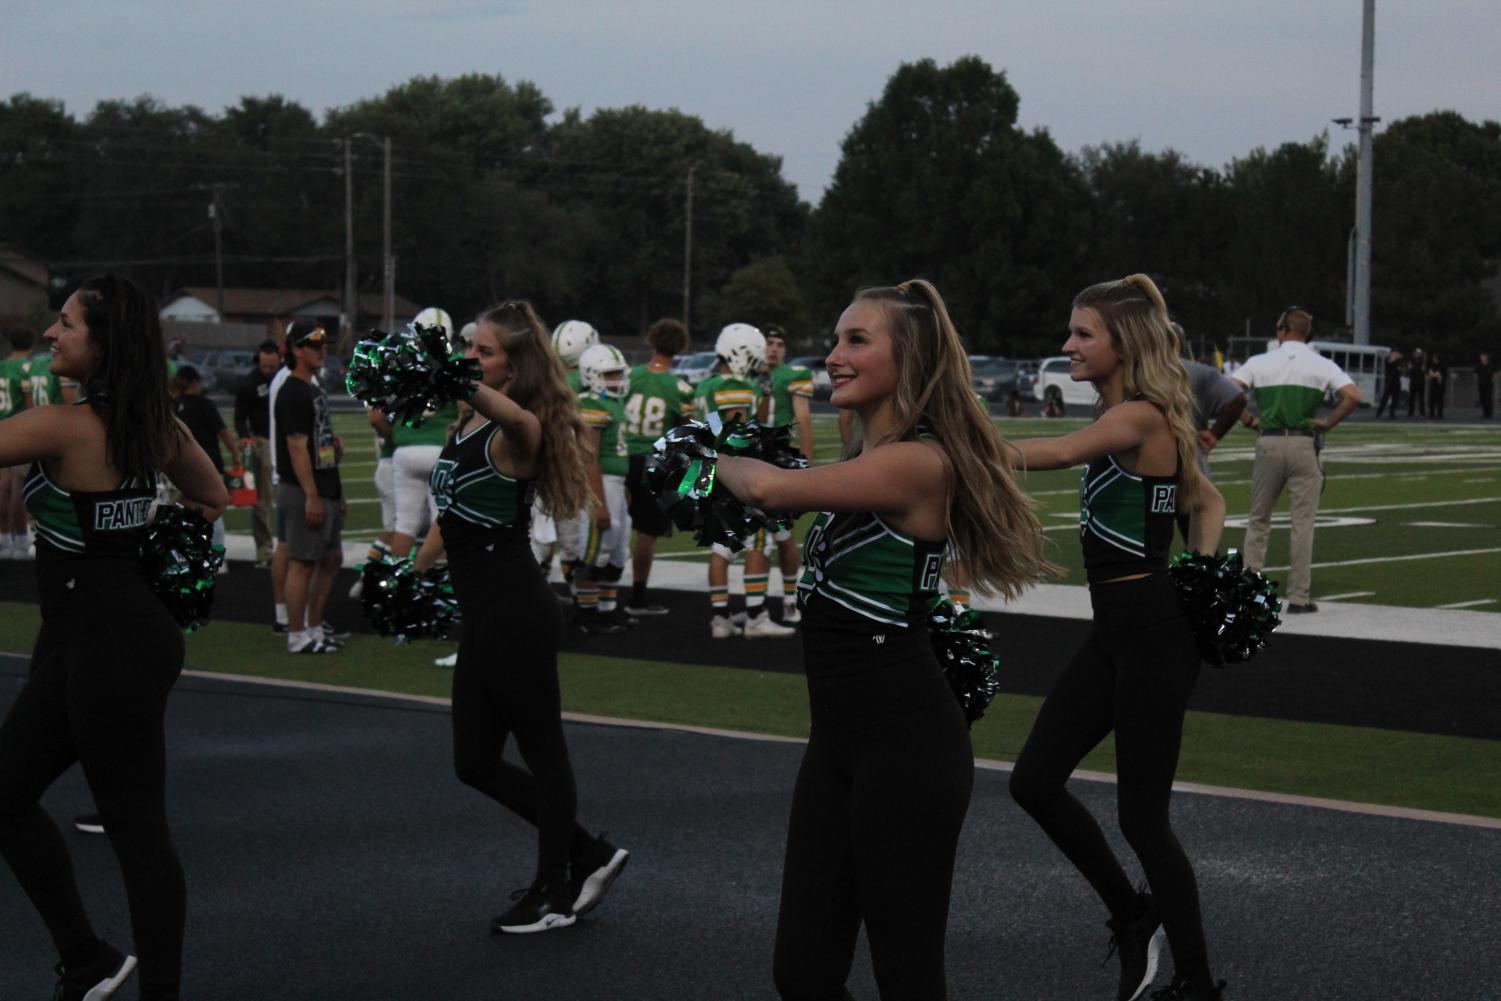 Derby+Cheer+and+Dance+Team+at+Homecoming+Football+Game+%28Photos+by+Agness+Mbezi%29